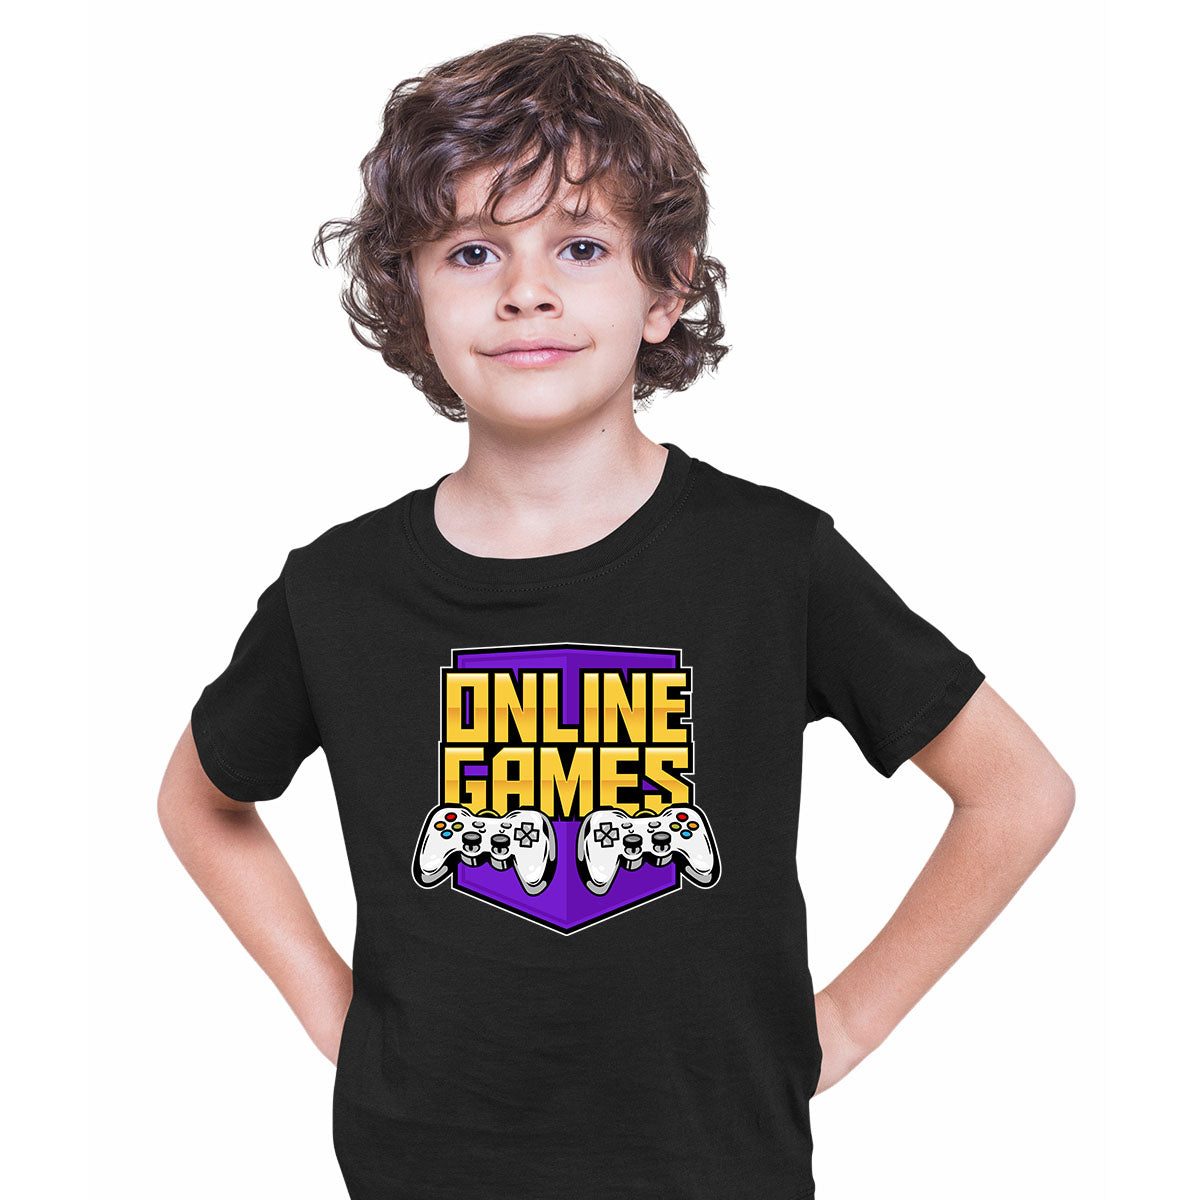 Retro Game 80's Collection Three Online Games Typography T-shirt for Kids - Kuzi Tees